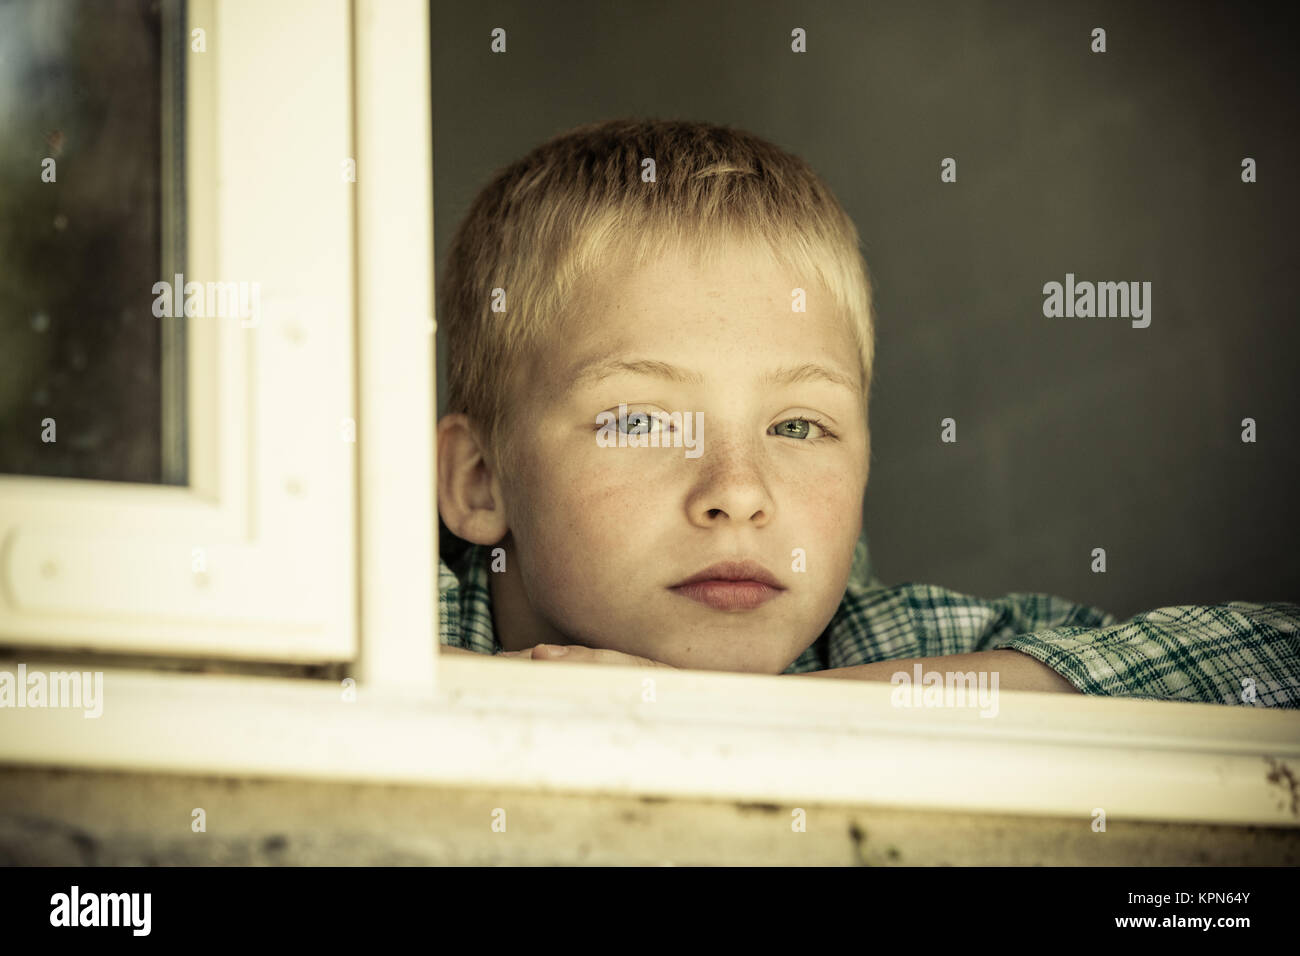 Child with sad expression looking out from window Stock Photo